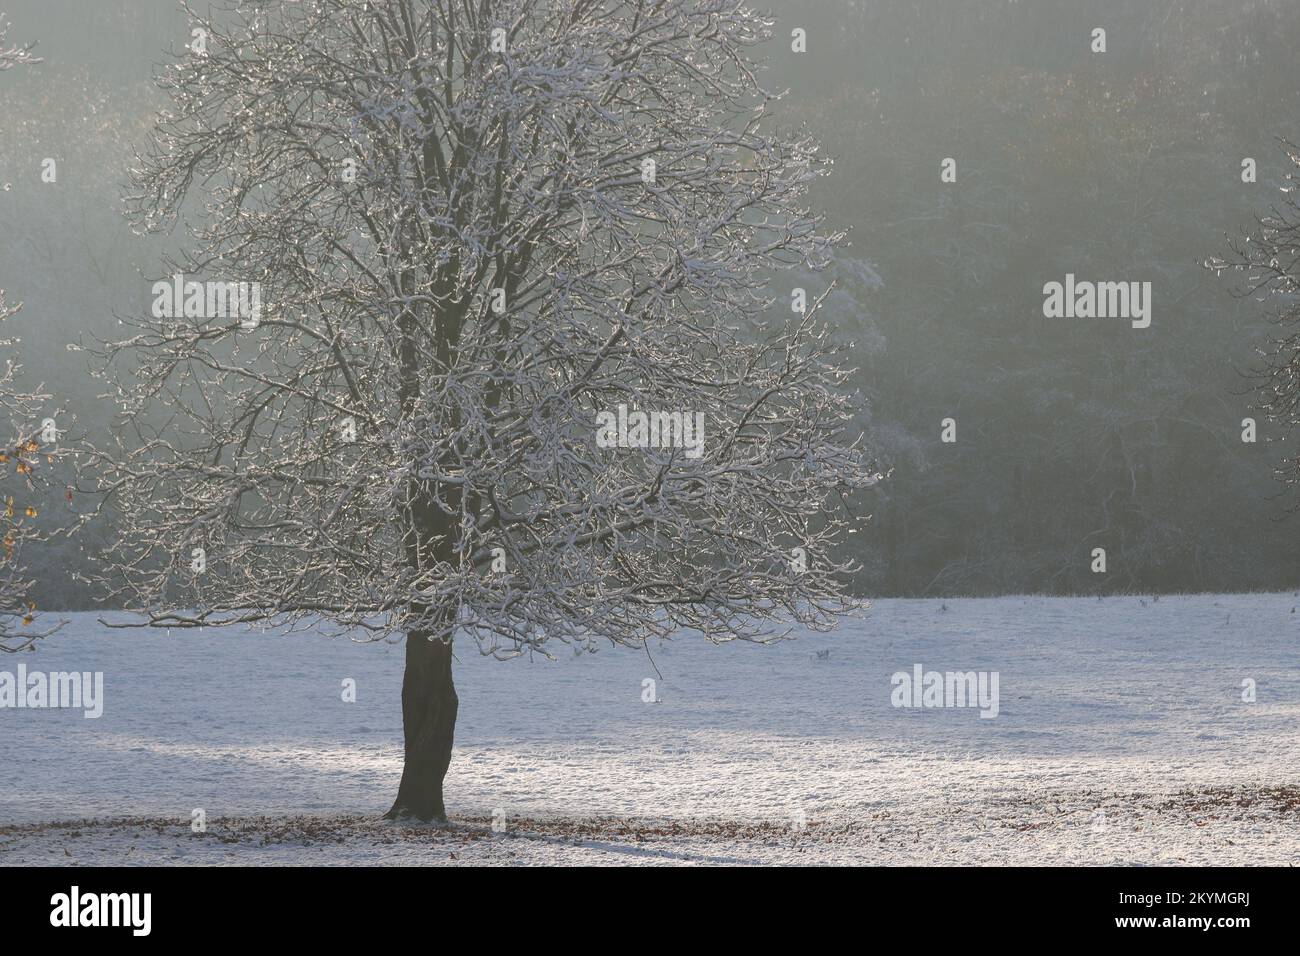 Winter scene, hoarfrost-covered tree on a frosty white meadow against a dark hazy background, copy space Stock Photo